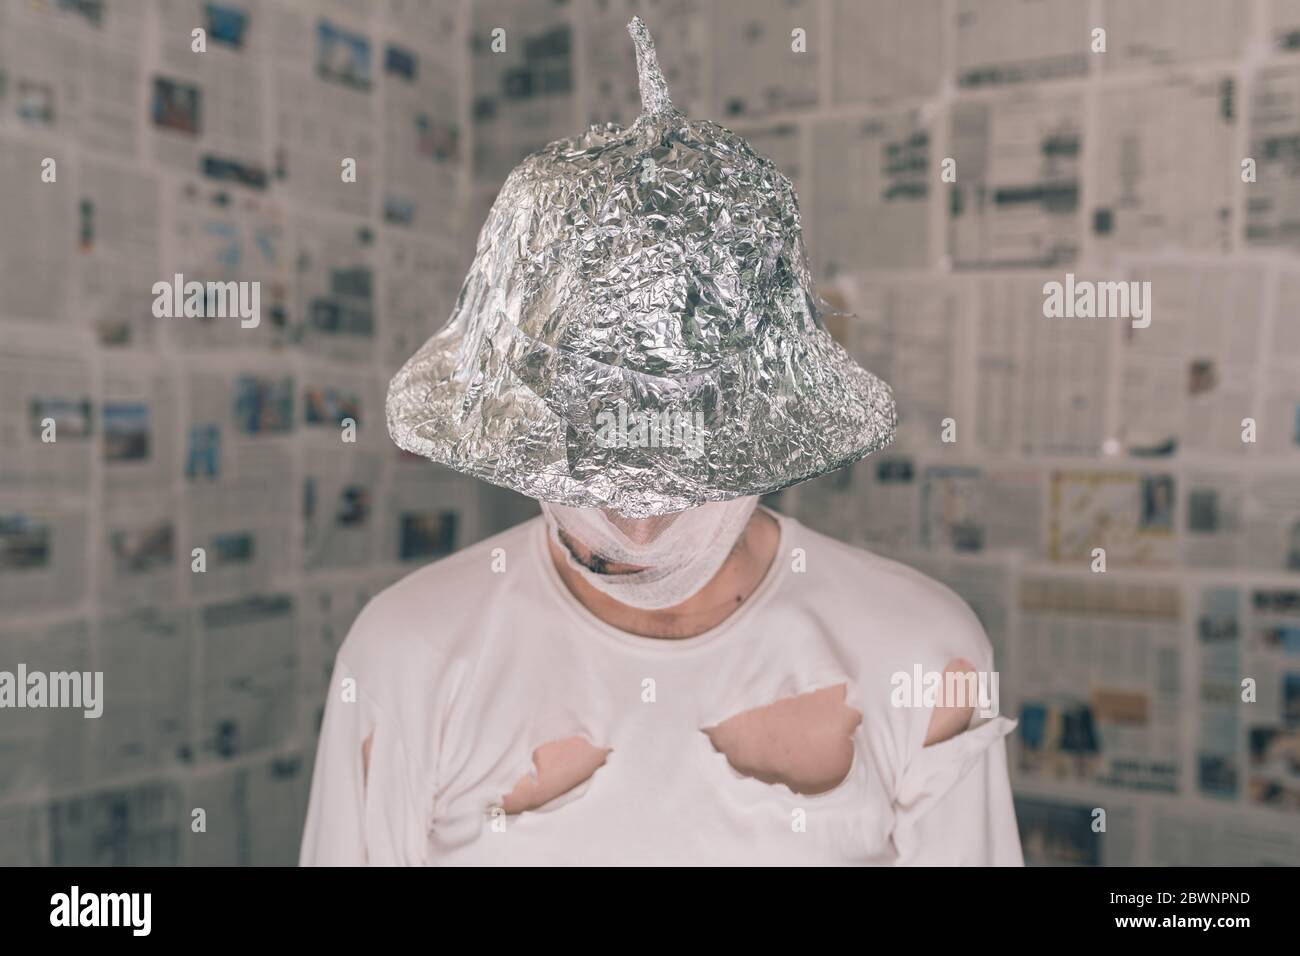 Delusional paranoid man with tin foil hat talking in mind control concept Stock Photo